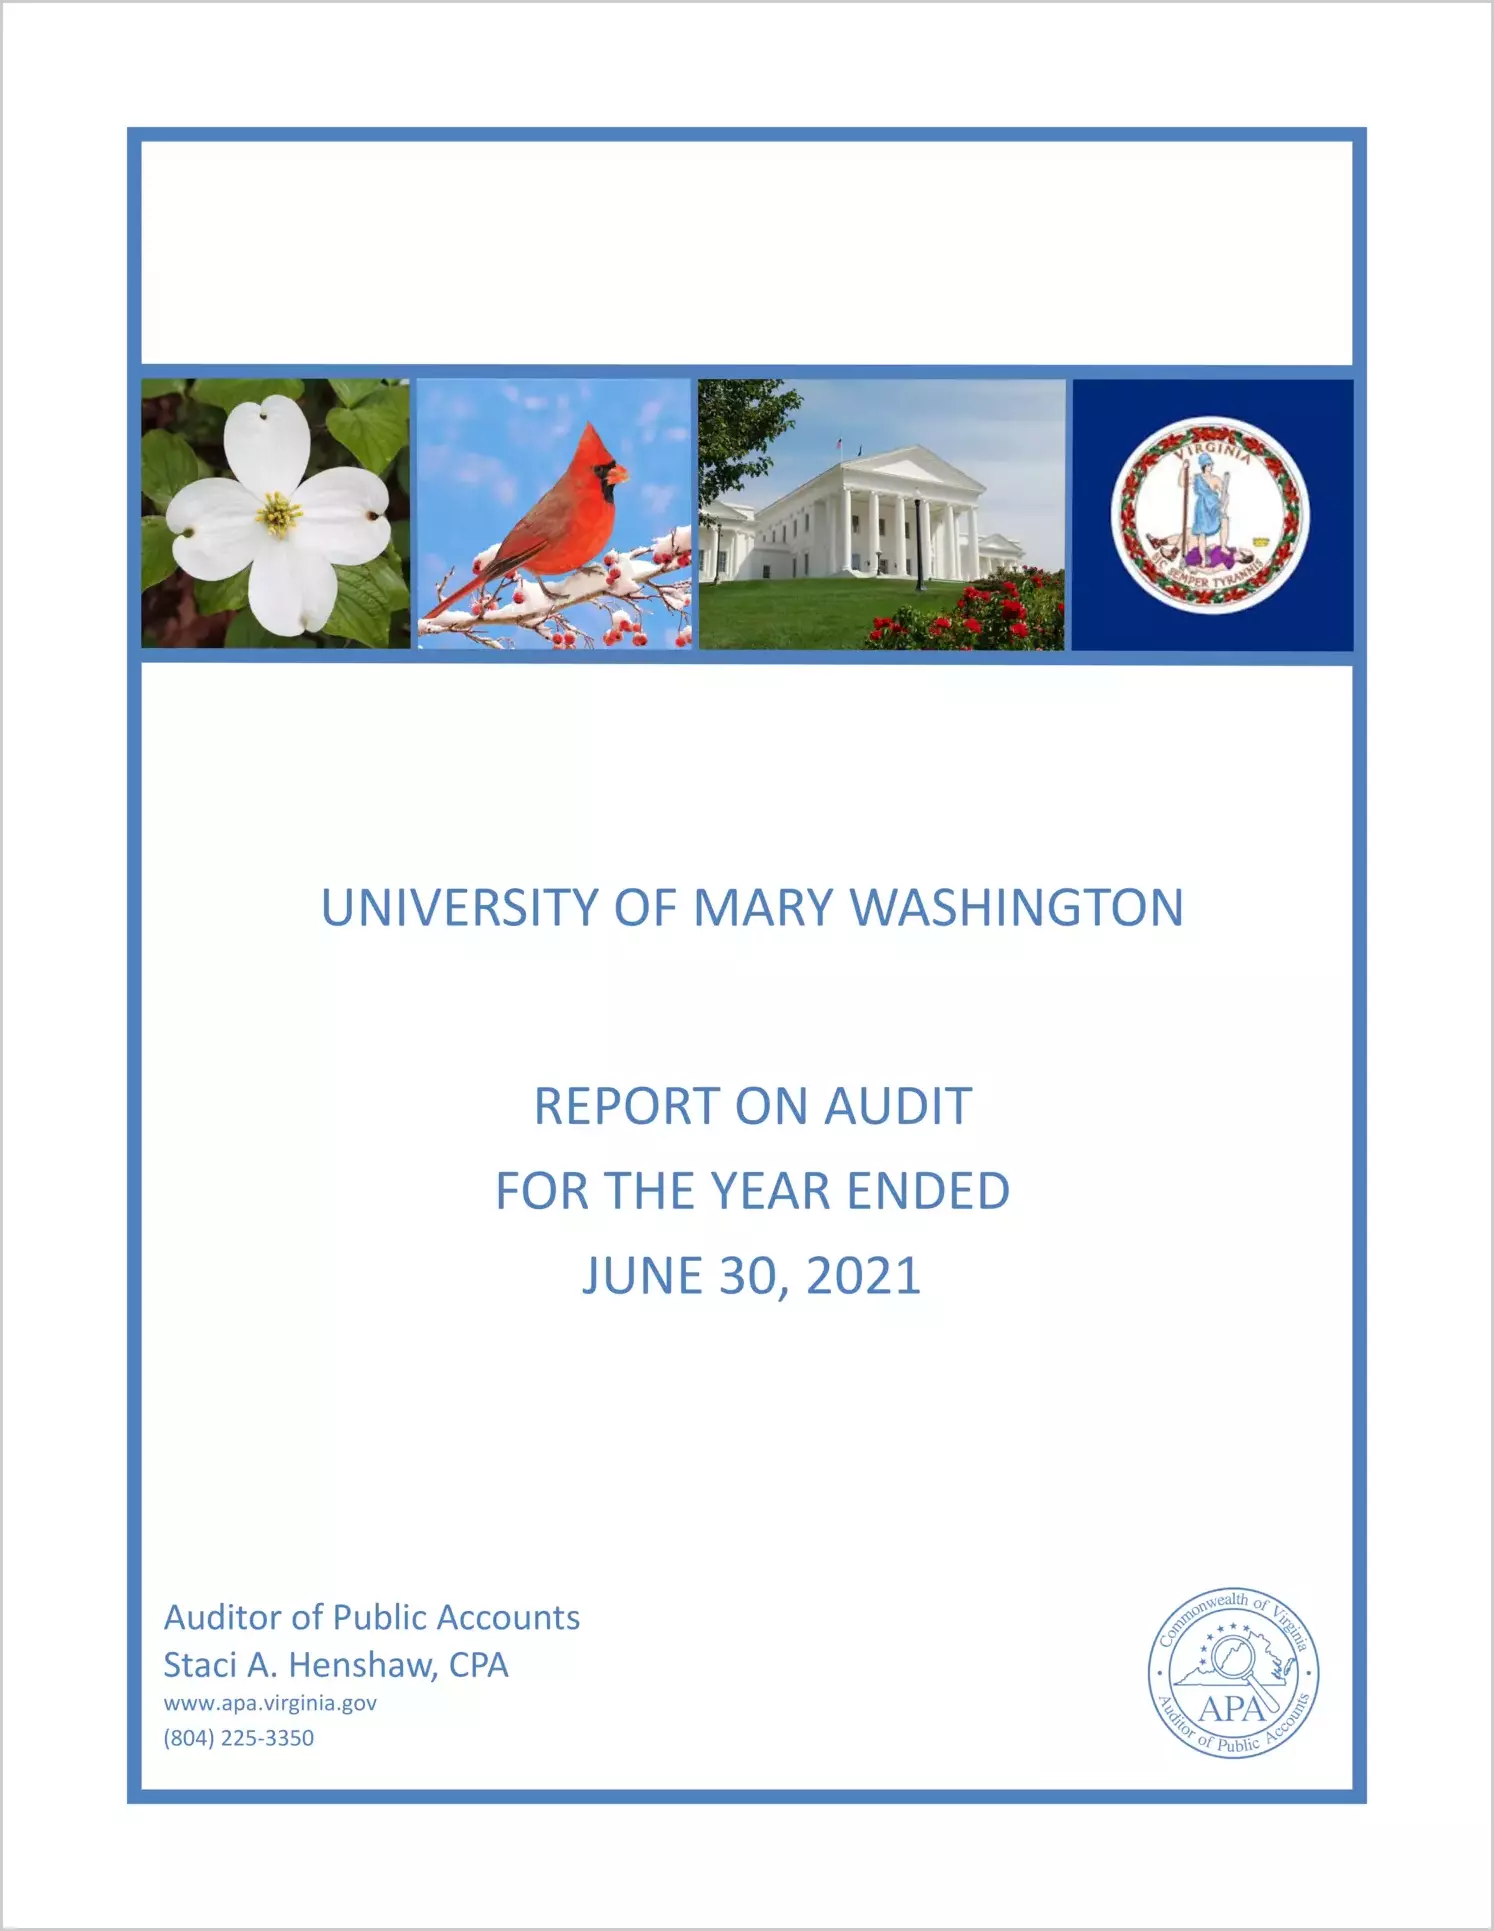 University of Mary Washington for the year ended June 30, 2021